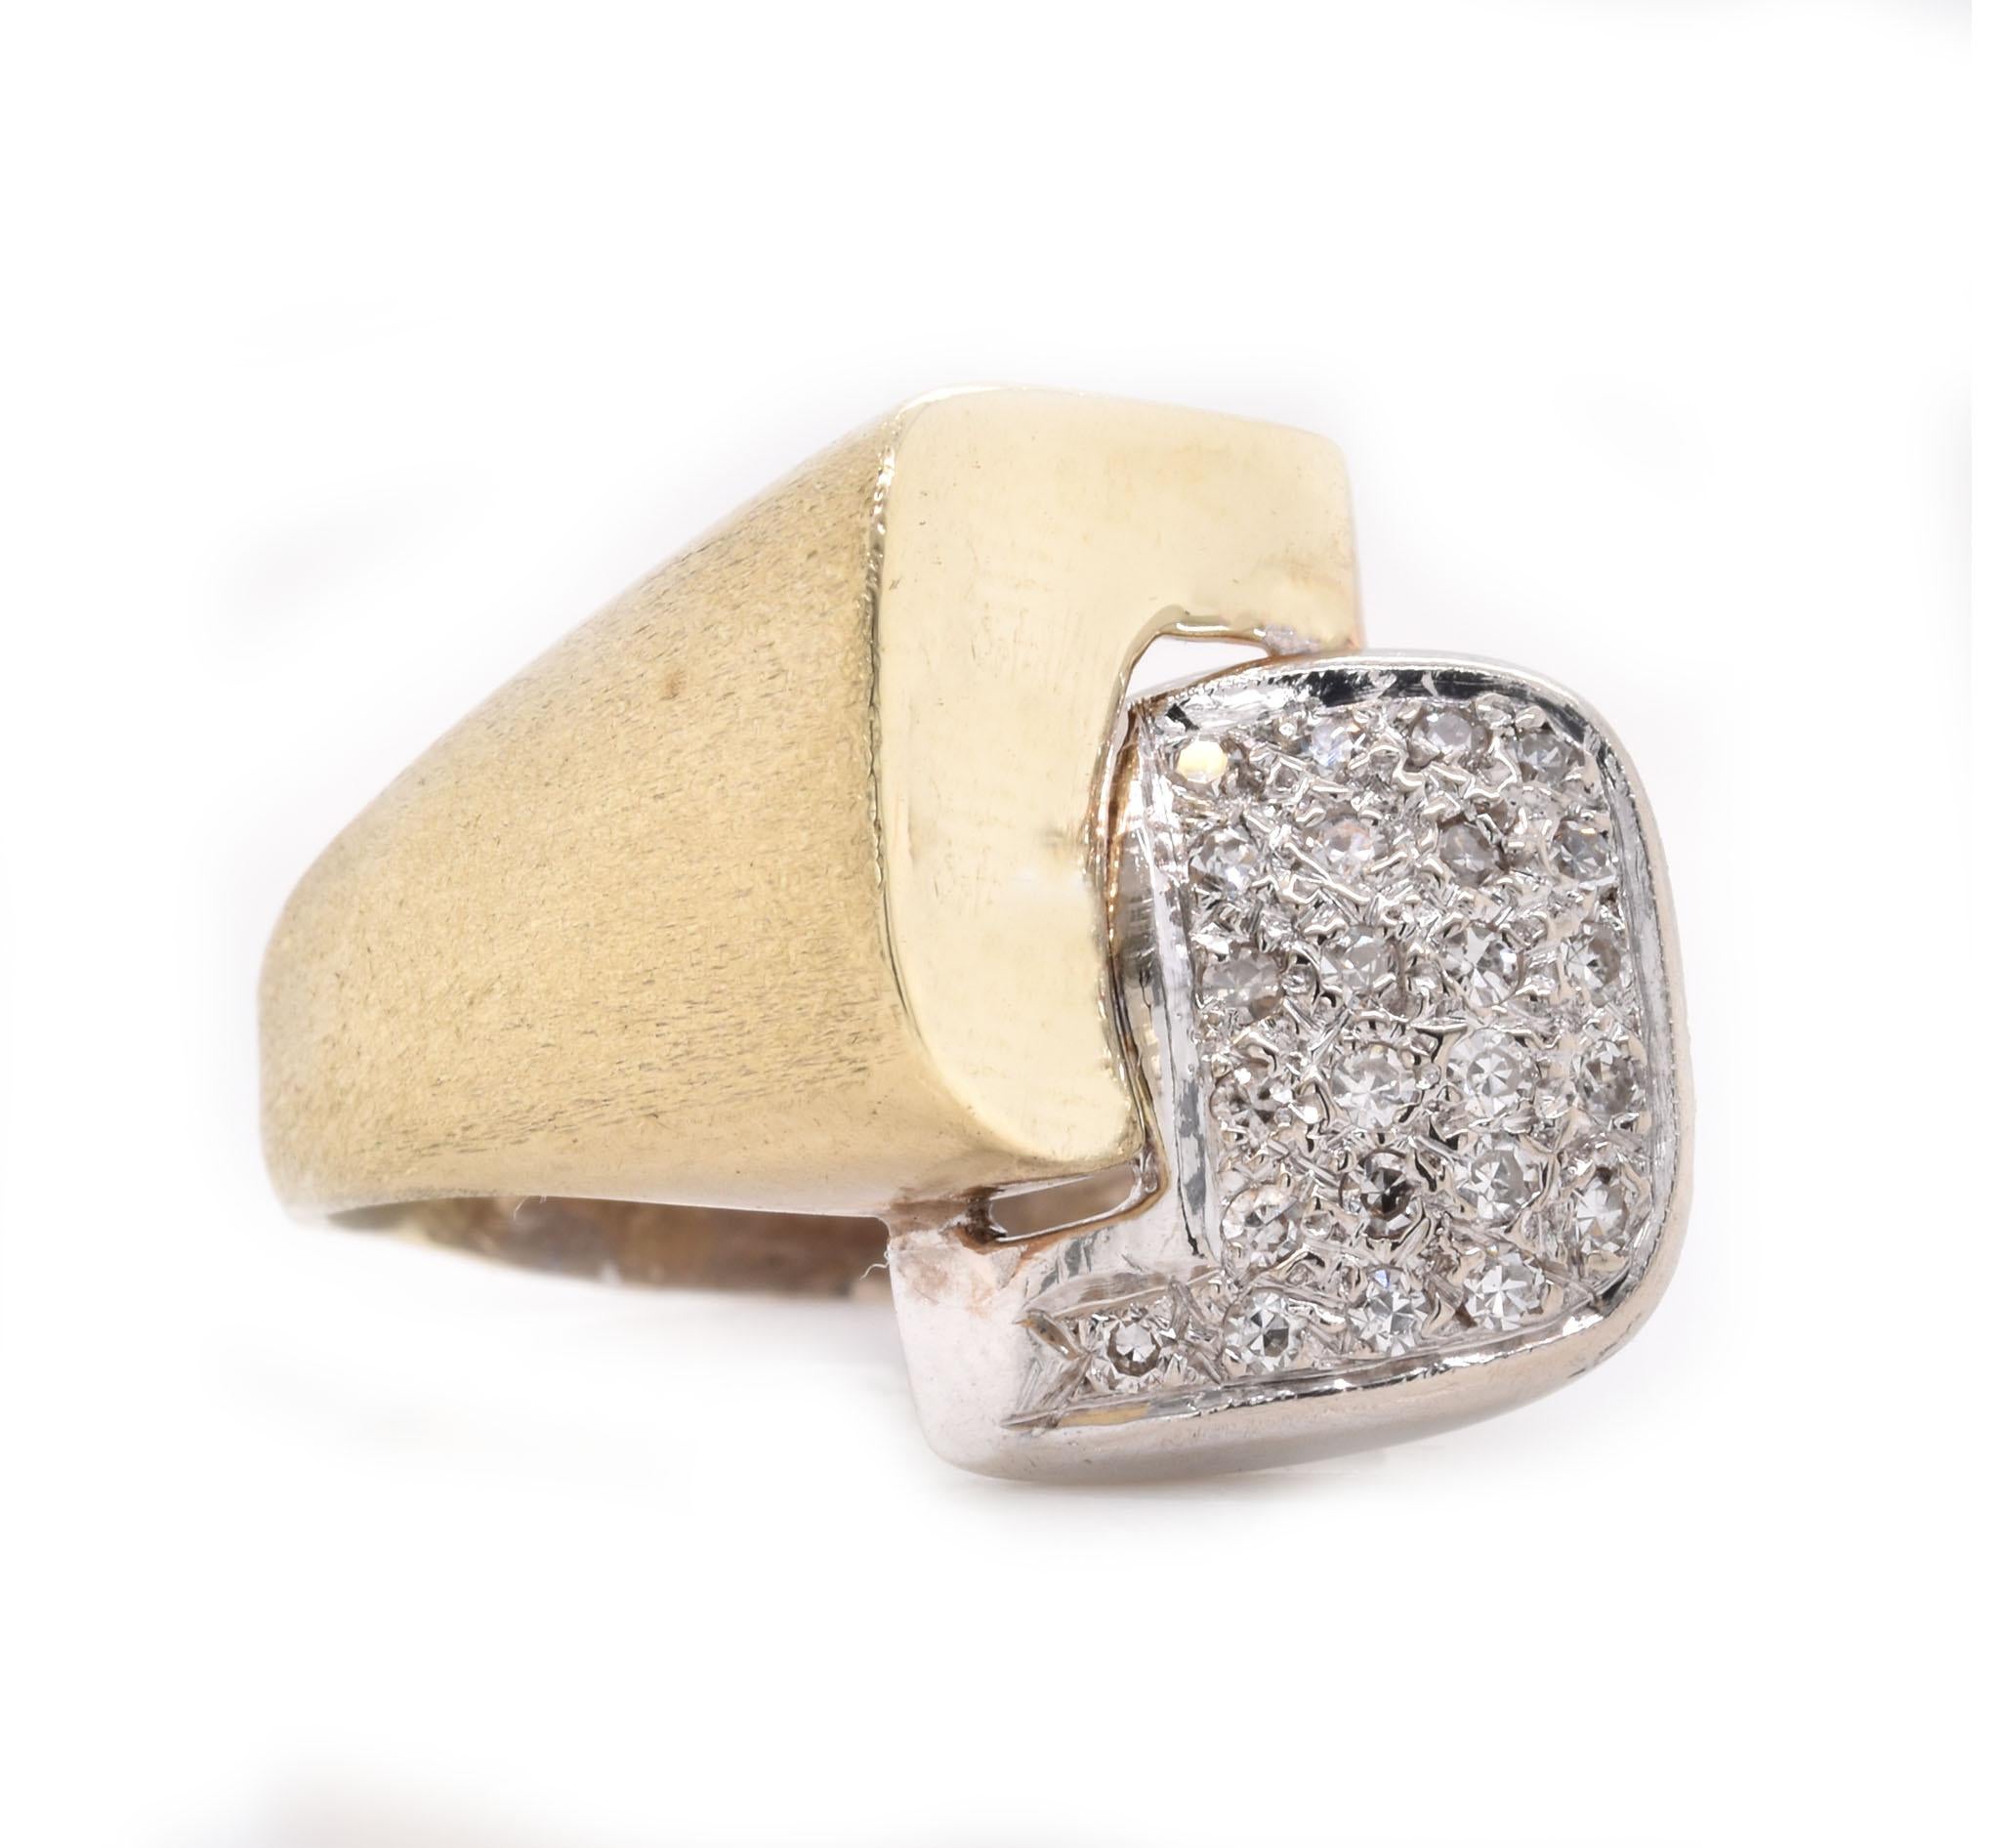 Designer: custom
Material: 14K white and yellow gold 
Diamond: 25 round brilliant cut = .23cttw
Color: H
Clarity: SI1
Ring size: 8 (please allow two additional shipping days for sizing requests)
Weight:  7.44 grams
